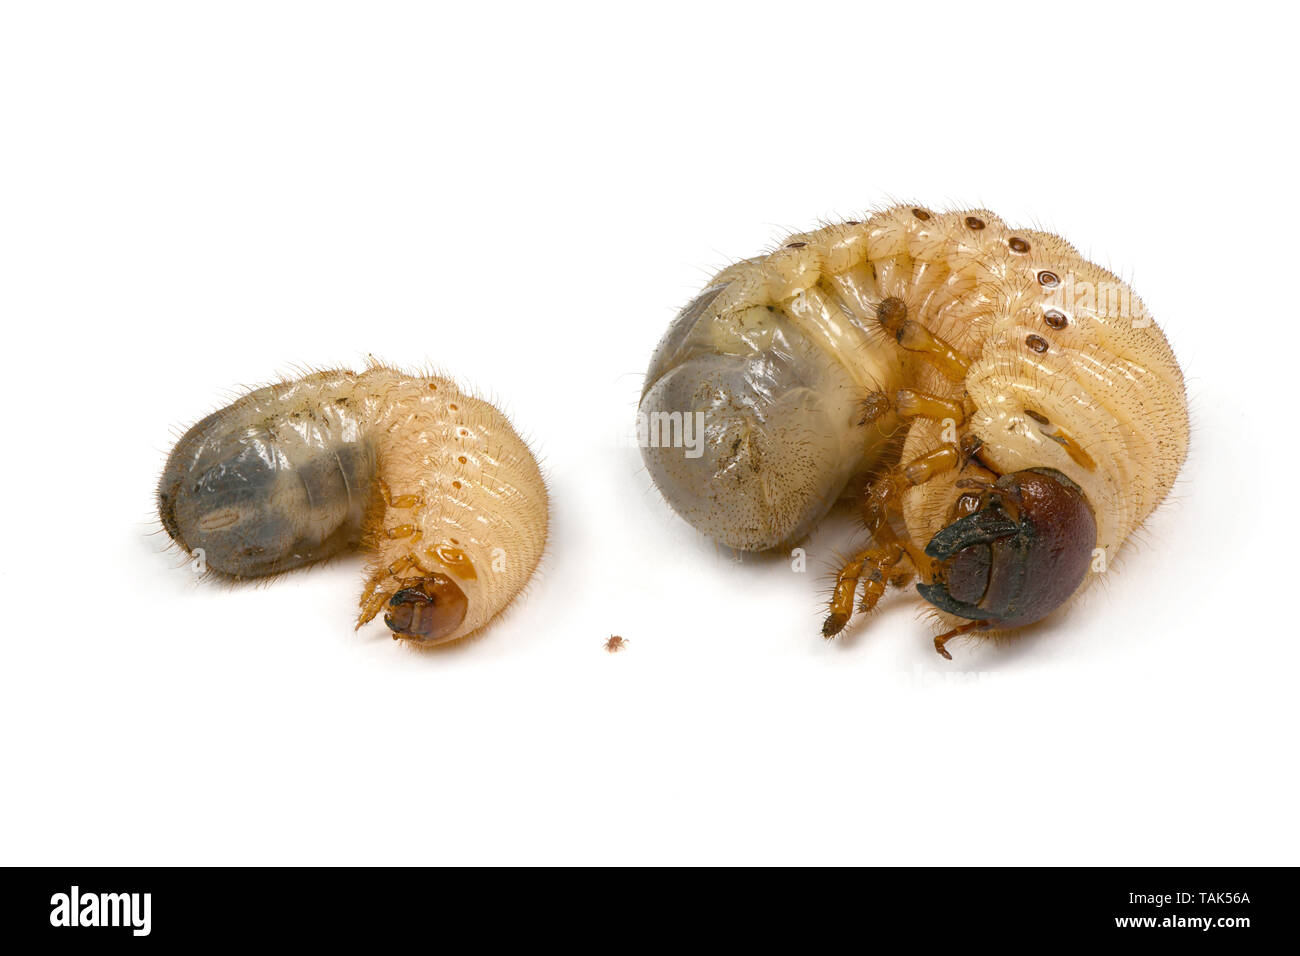 Concept photo larva of two beetles, rhinoceros beetle (Oryctes nasicornis) and may-bug (Melolontha)  and their acarus, parasite of their species, isol Stock Photo